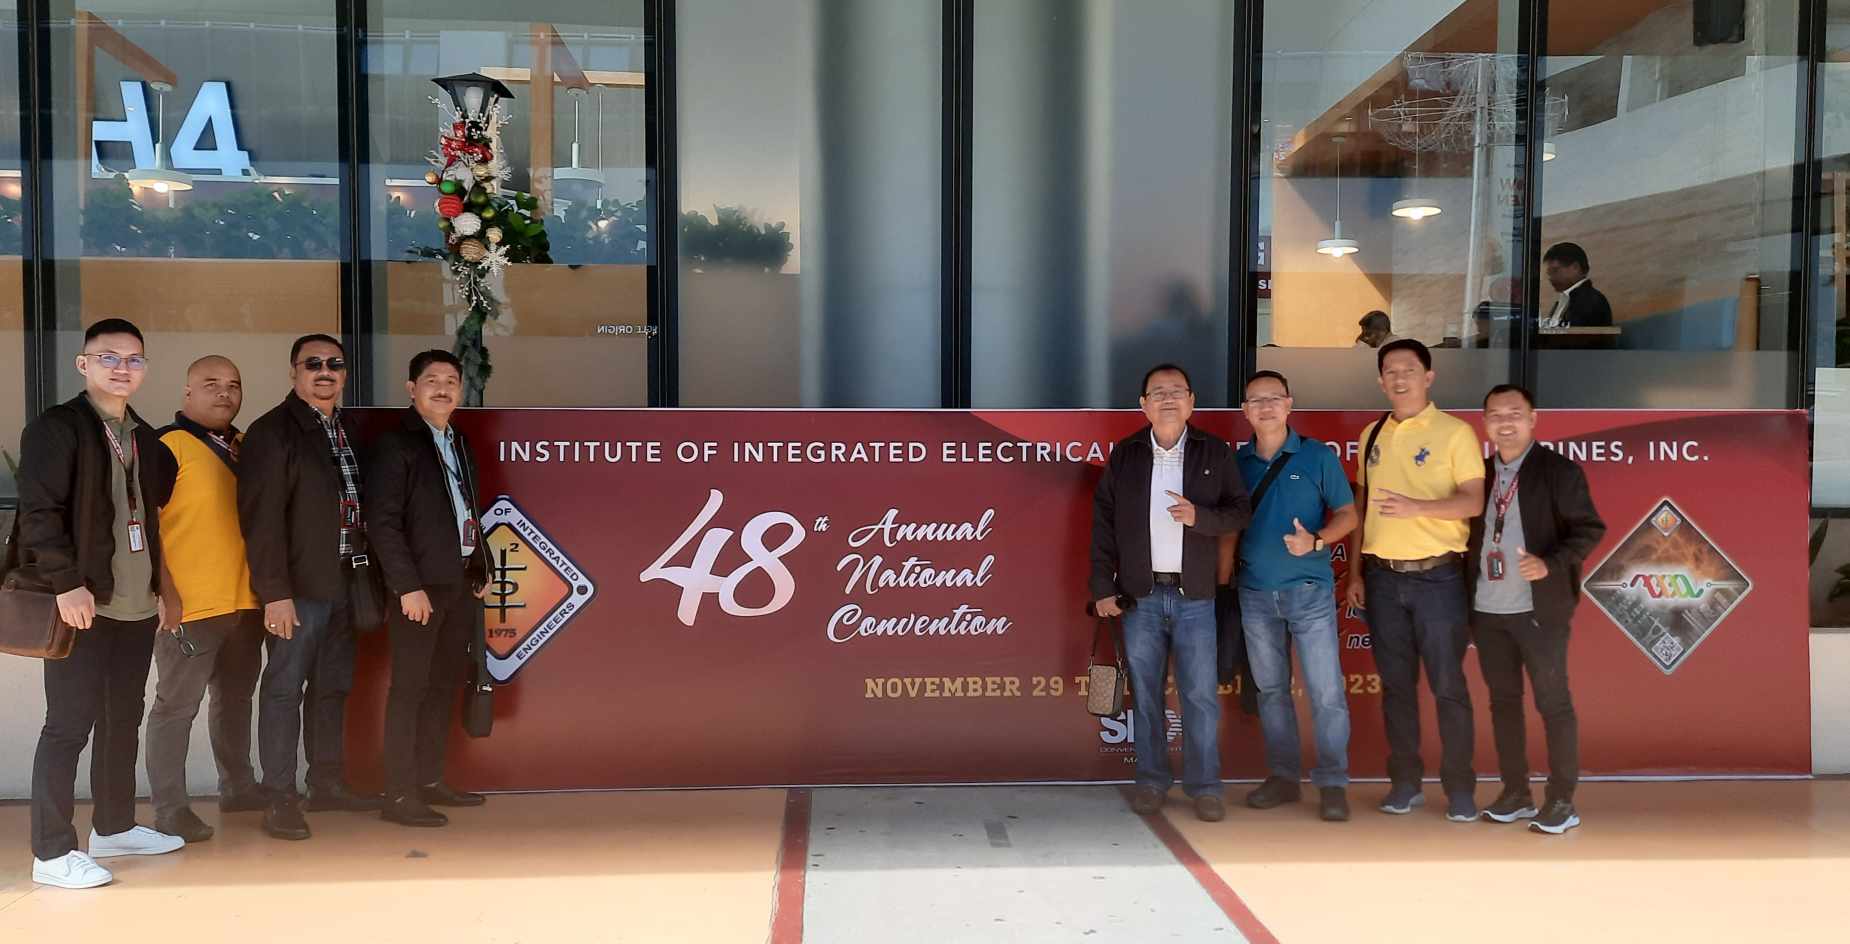 CAPELCO ENGINEERS ATTENDED THE IIEE’s 48TH ANNUAL CONVENTION